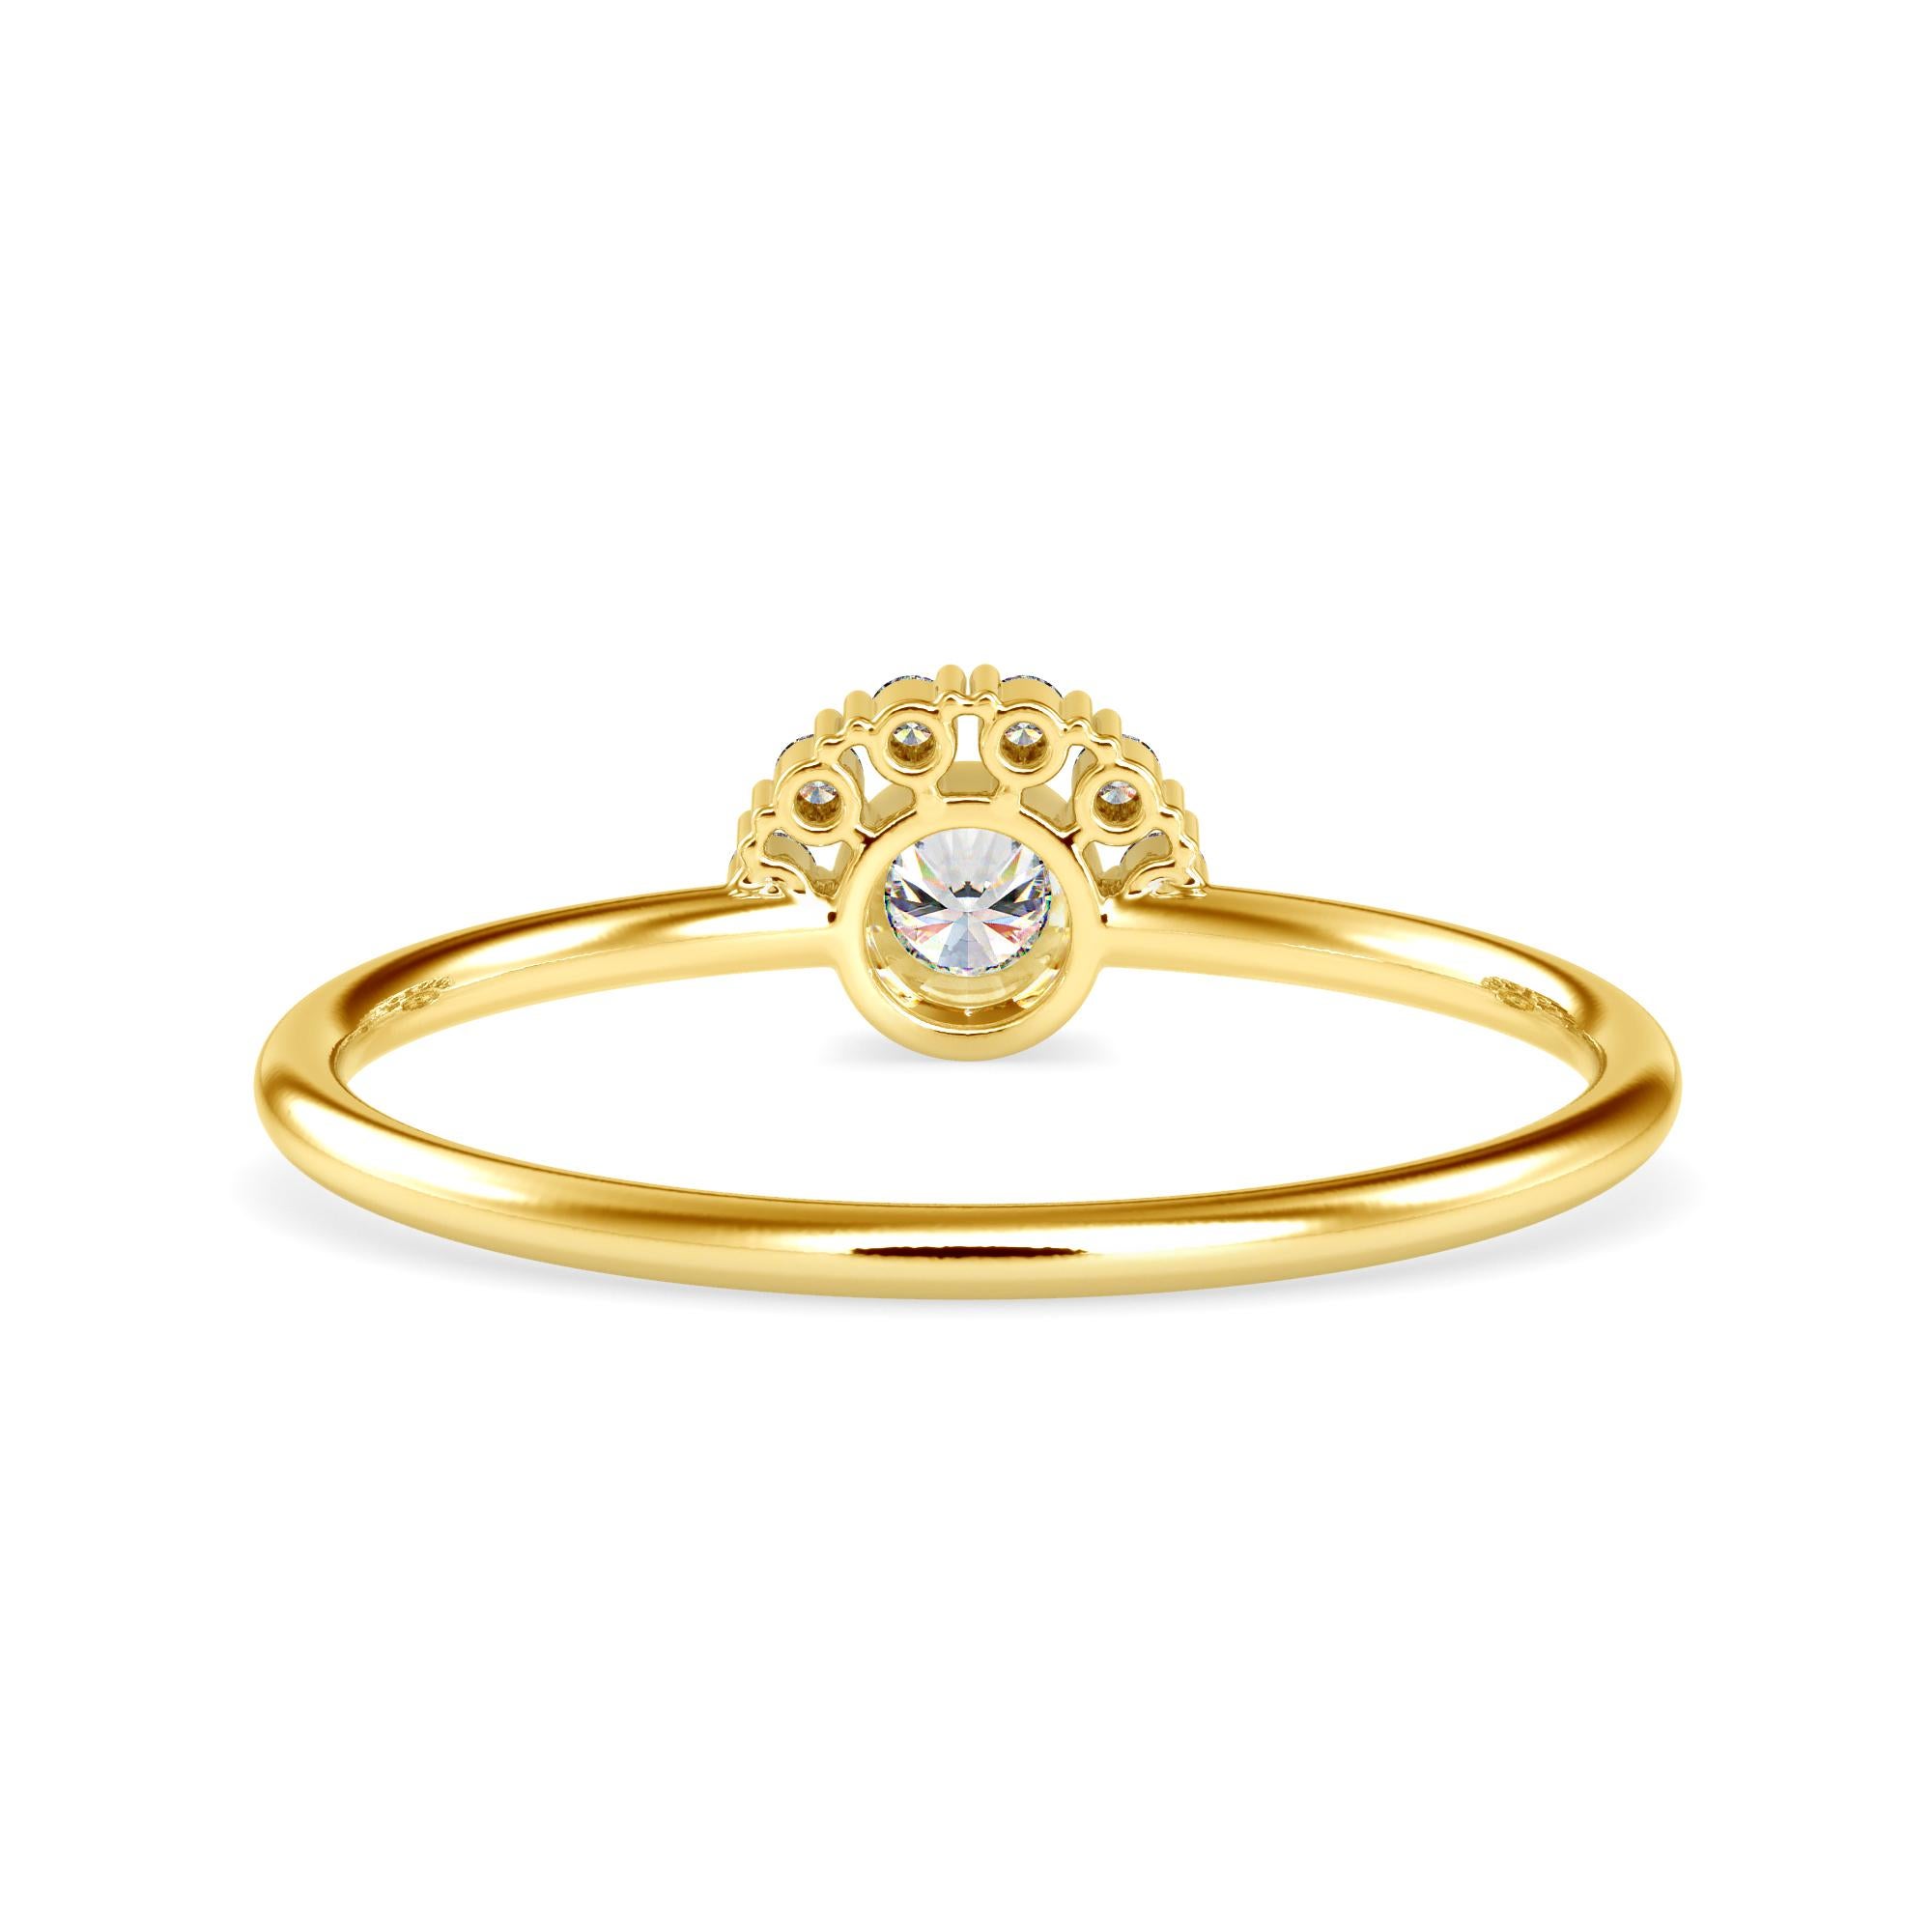 0.13 Carat Diamond 14K Yellow Gold Ring
Stamped: 14K
Total Ring Weight: 1.3 Grams
Diamond Weight: 0.04 Carat (F-G Color, VS2-SI1 Clarity) 1.2 Millimeters
Diamond Weight: 0.09 Carat (F-G Color, VS2-SI1 Clarity) 2.9 Millimeters 
Diamond Quantity: 7